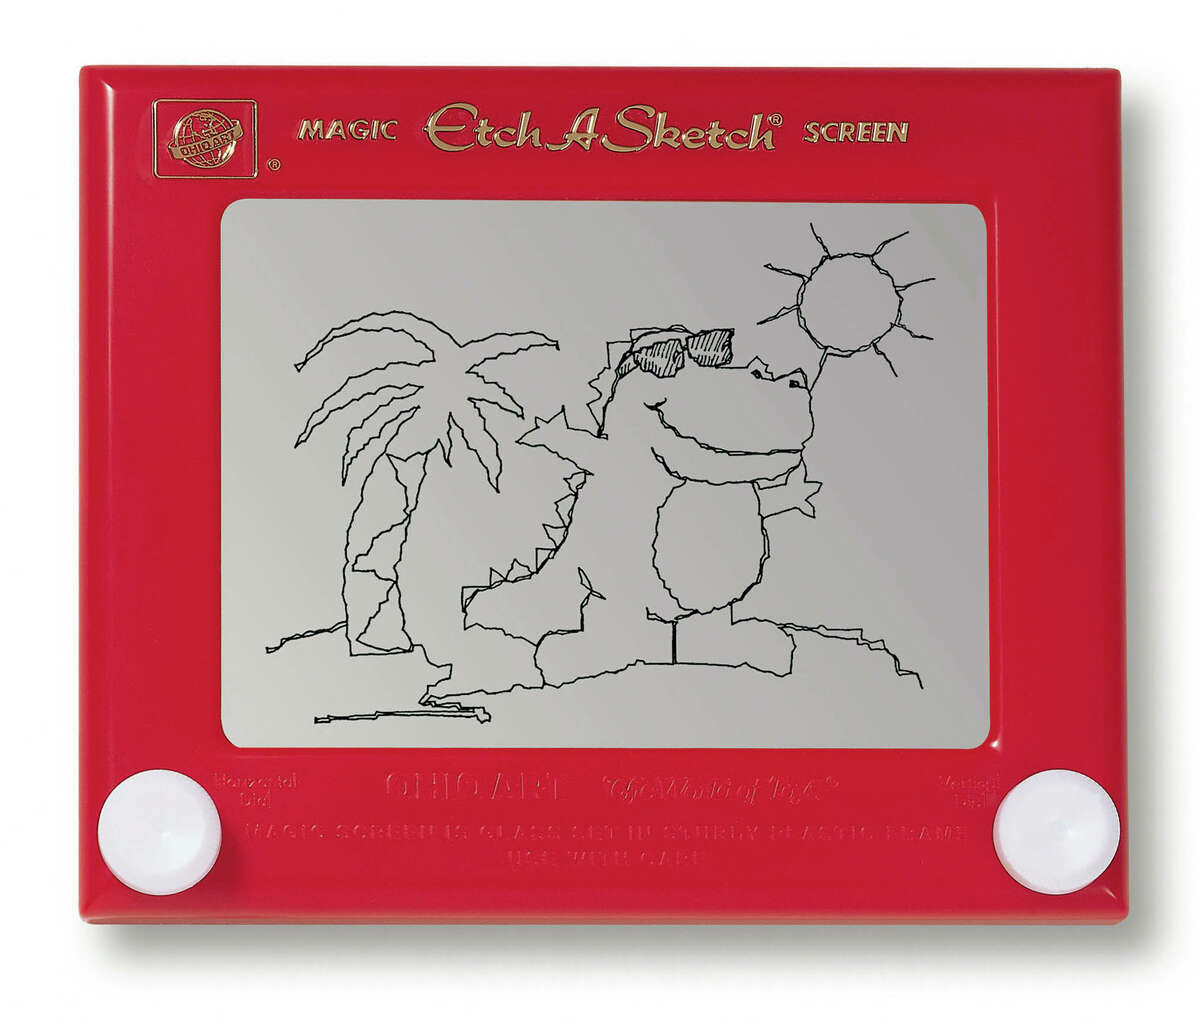 FILE - This undated photo provided by Ohio Art shows a classic Etch A Sketch which was introduced in 1960. The Ohio Art Co., based in Bryan, Ohio, says 86-year-old Andre Cassagnes, the inventor of the Etch A Sketch, died Jan. 16, 2013, in a Paris suburb. The cause wasn't disclosed Saturday, Feb. 2, 2013. (AP Photo/Ohio Art, File)